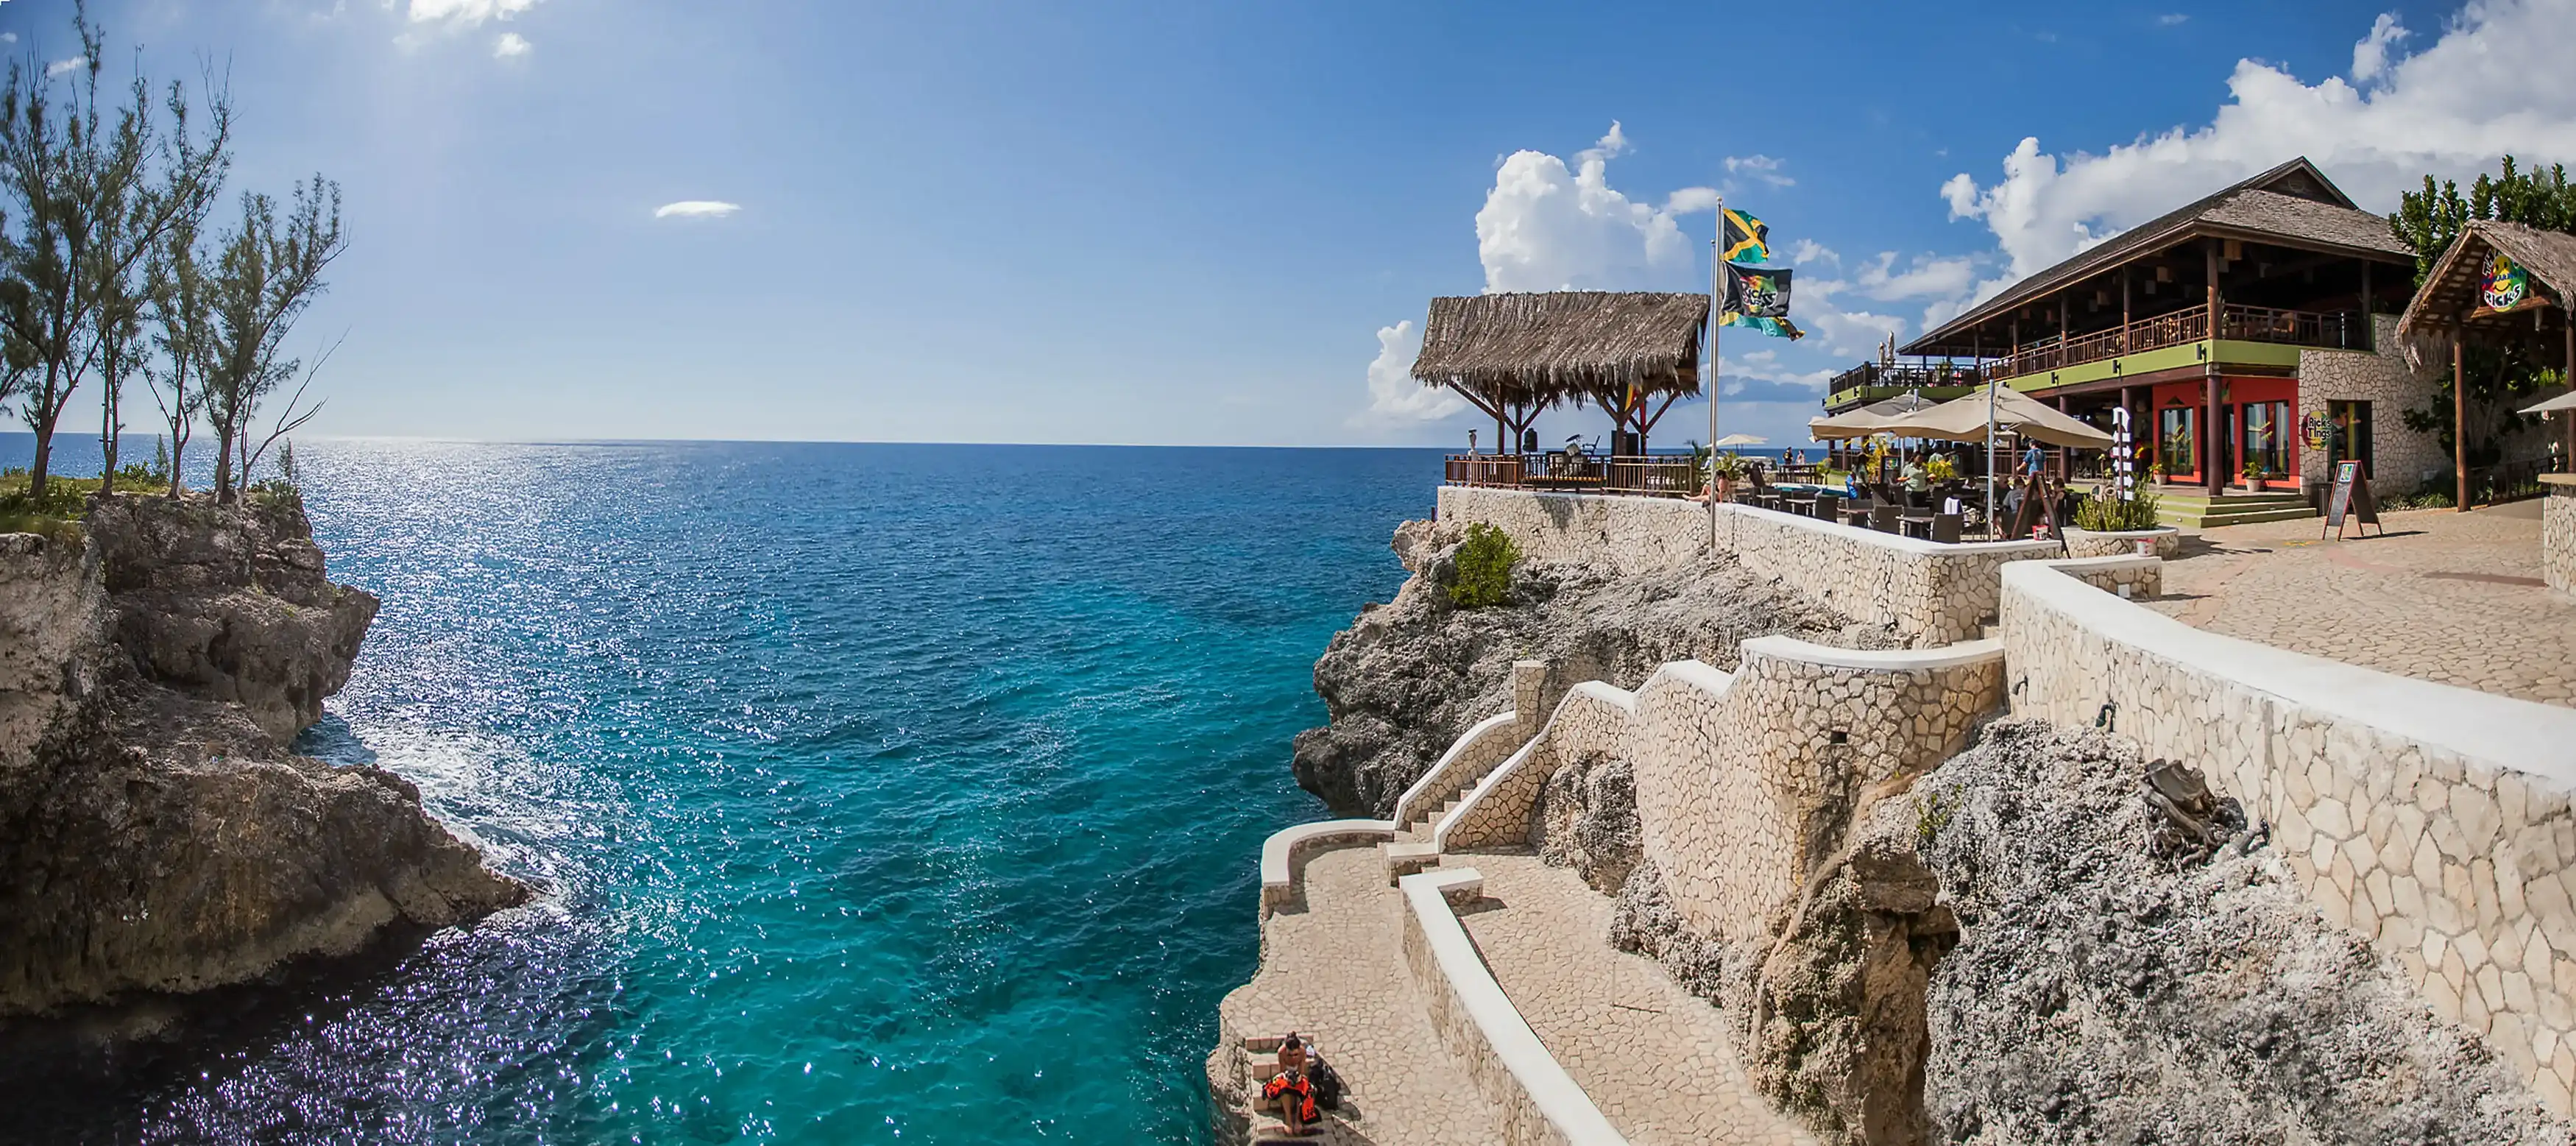 Negril, Jamaica - 11/25/2013: Famous Ricks restaurant in Negril Jamaica cliff jumping attraction day